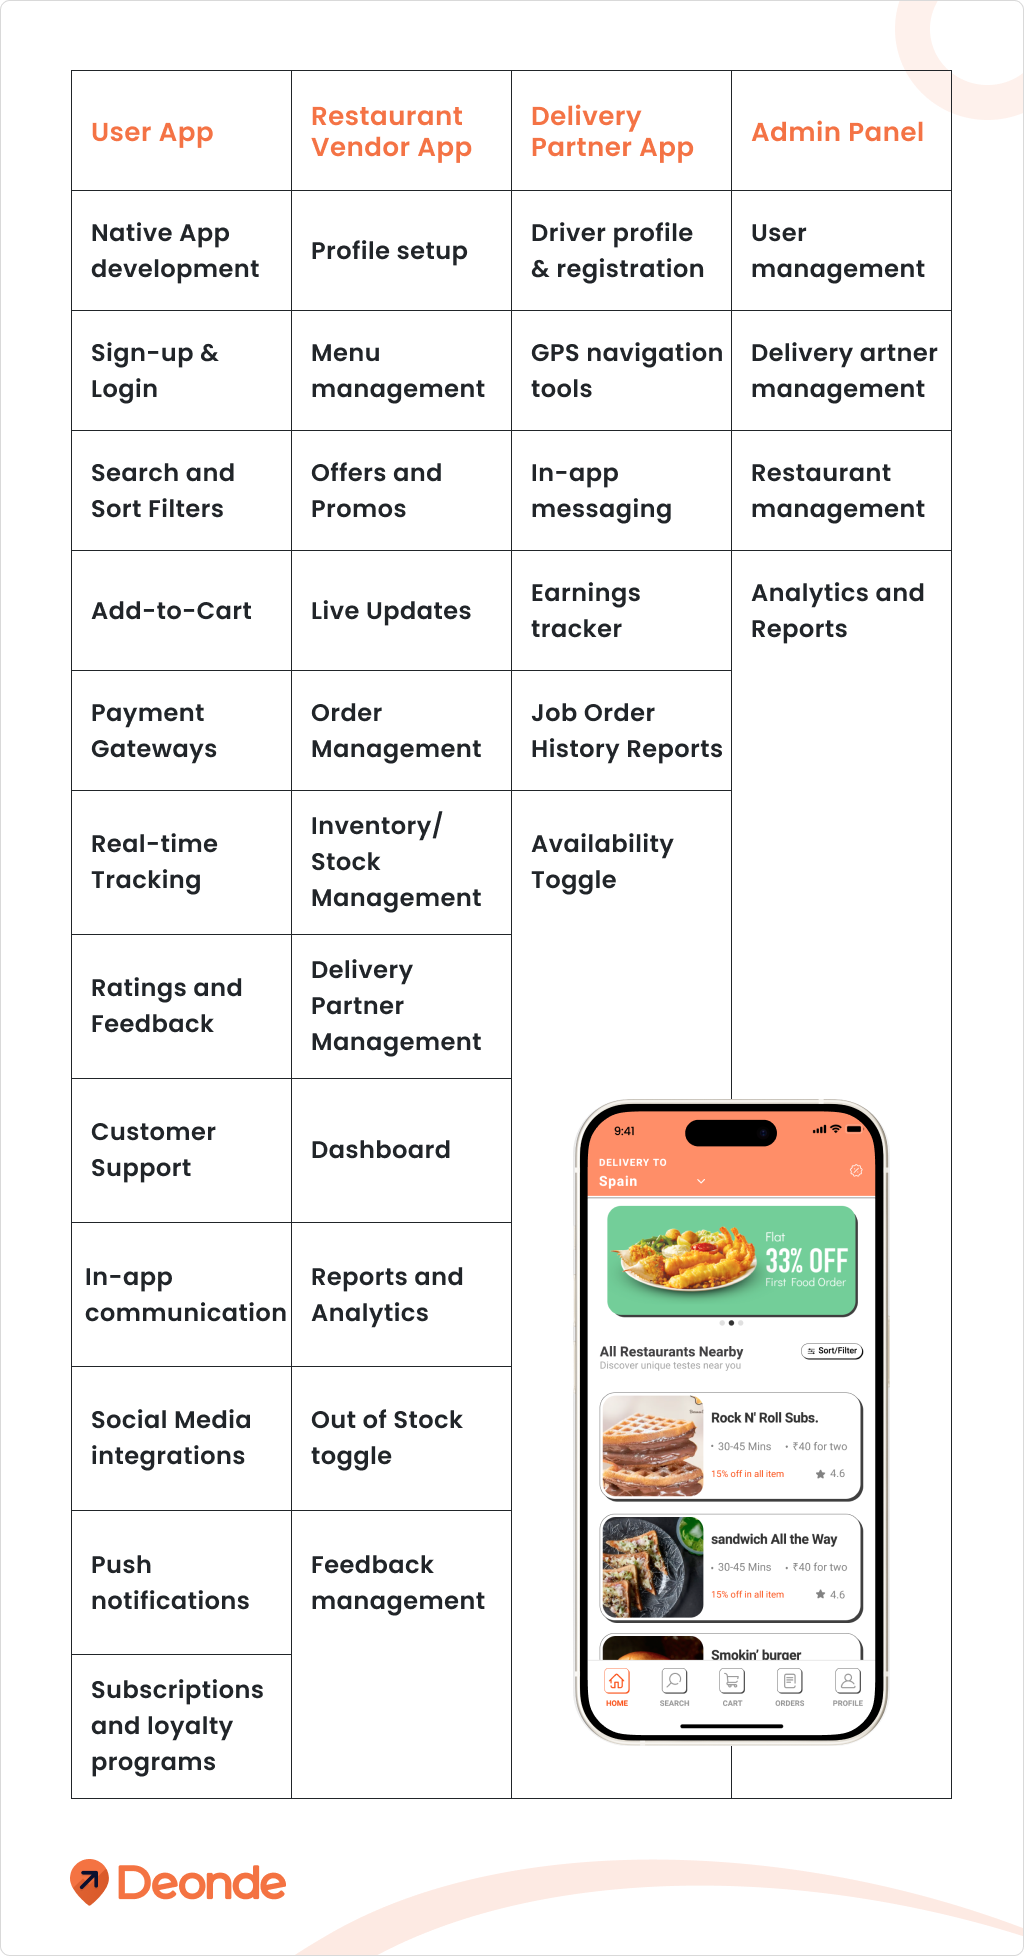 Features that every food delivery app like Uber Eats must have